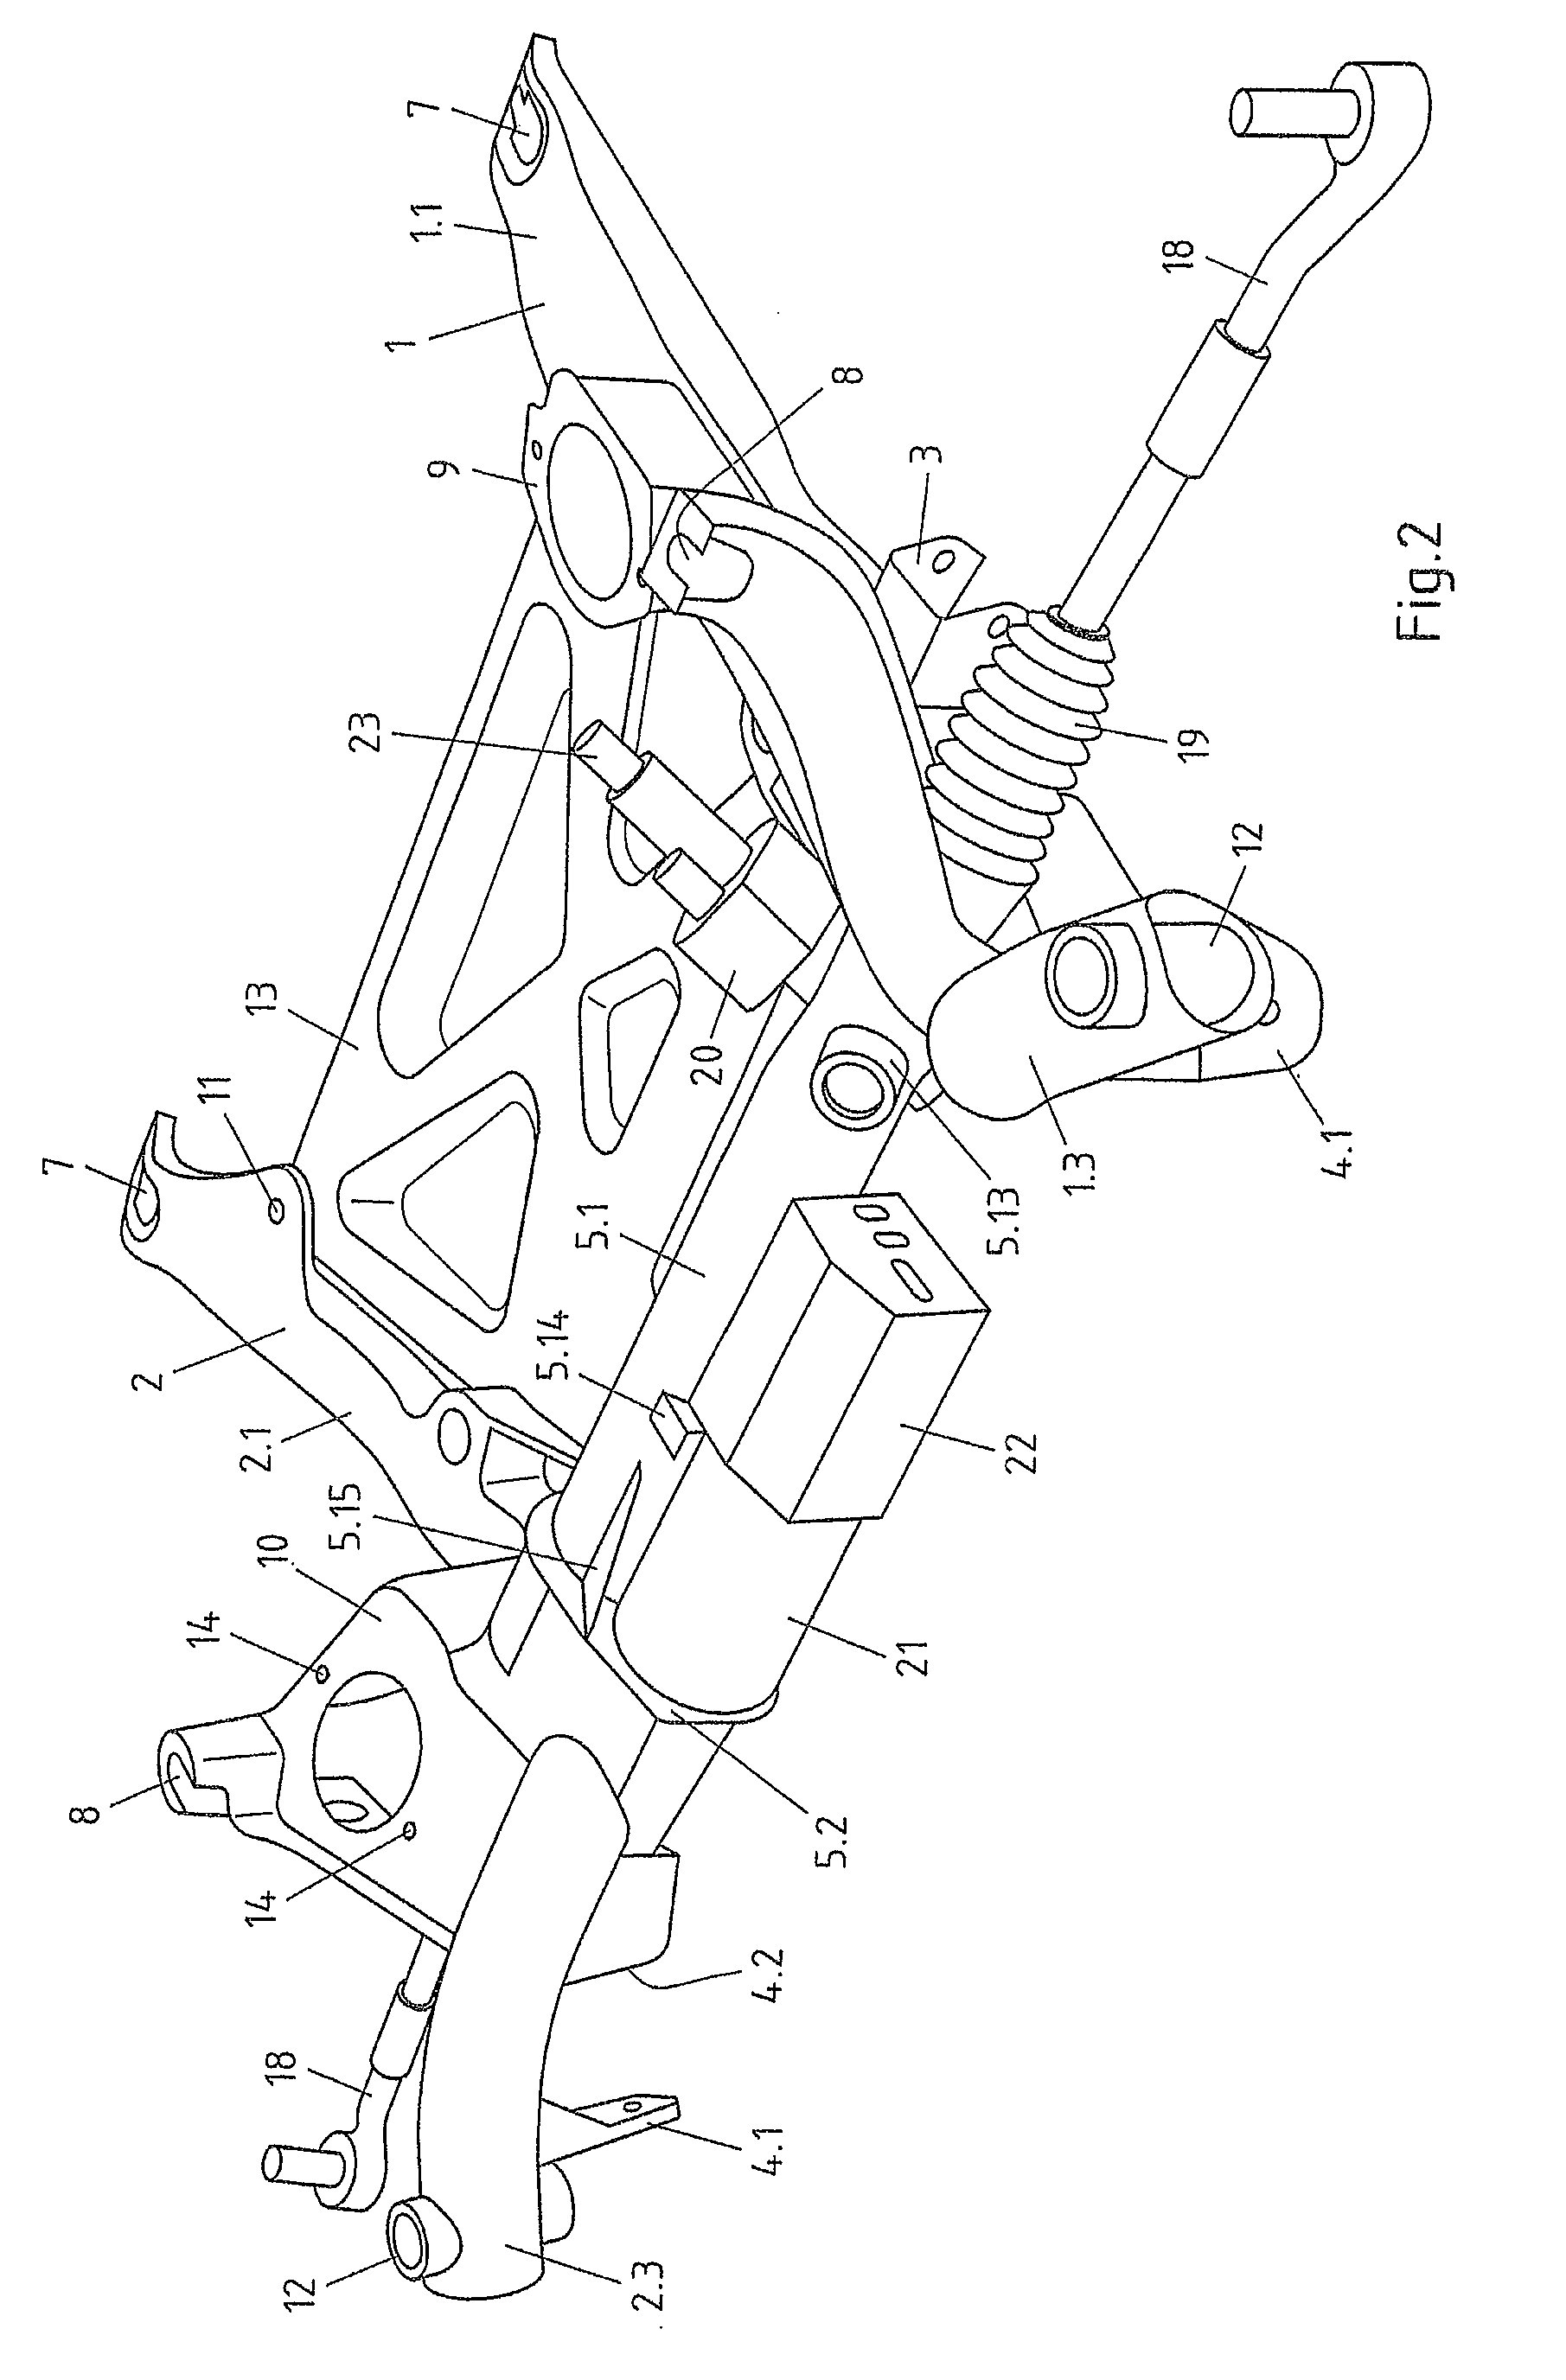 Front axle support having an integrated steering gear housing